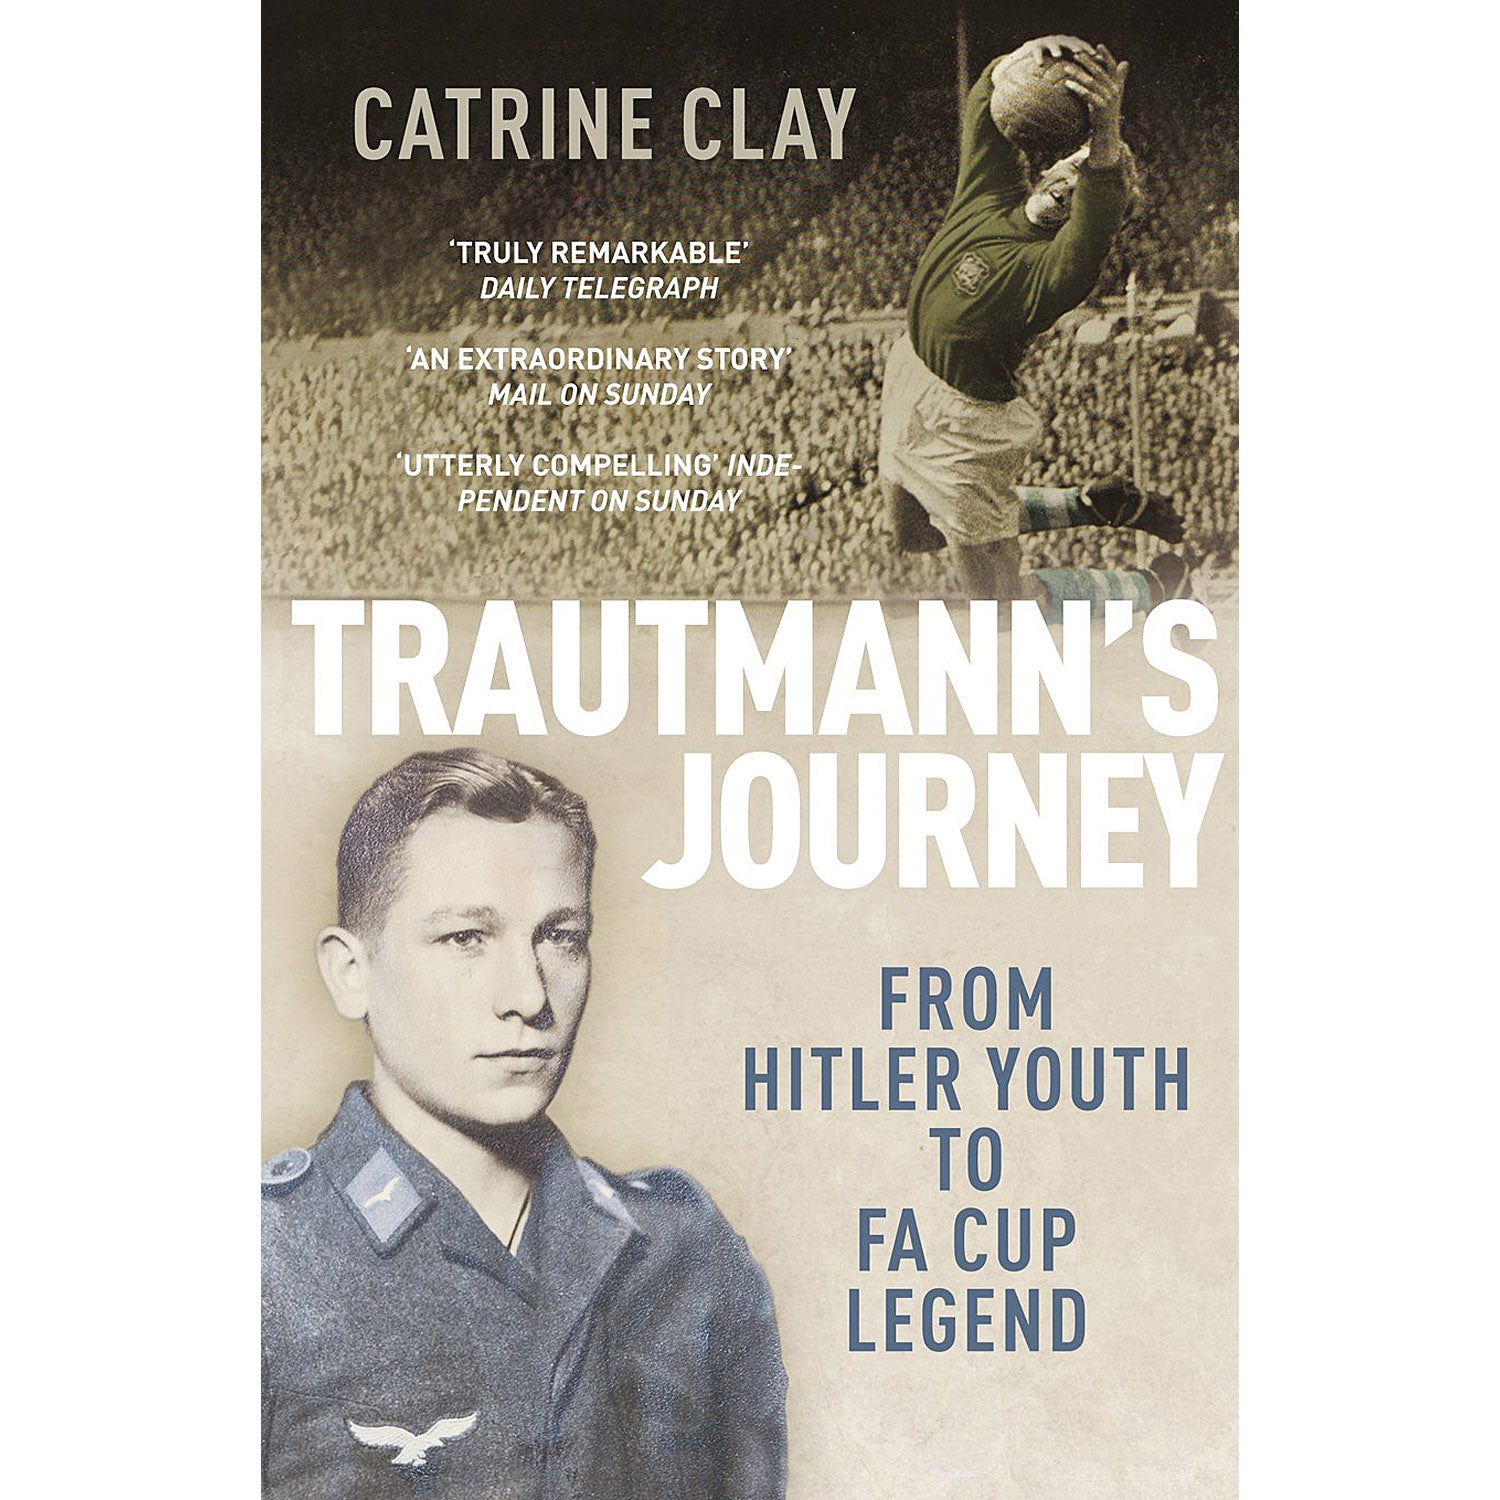 Trautmann's Journey – From Hitler Youth to F.A. Cup Legend